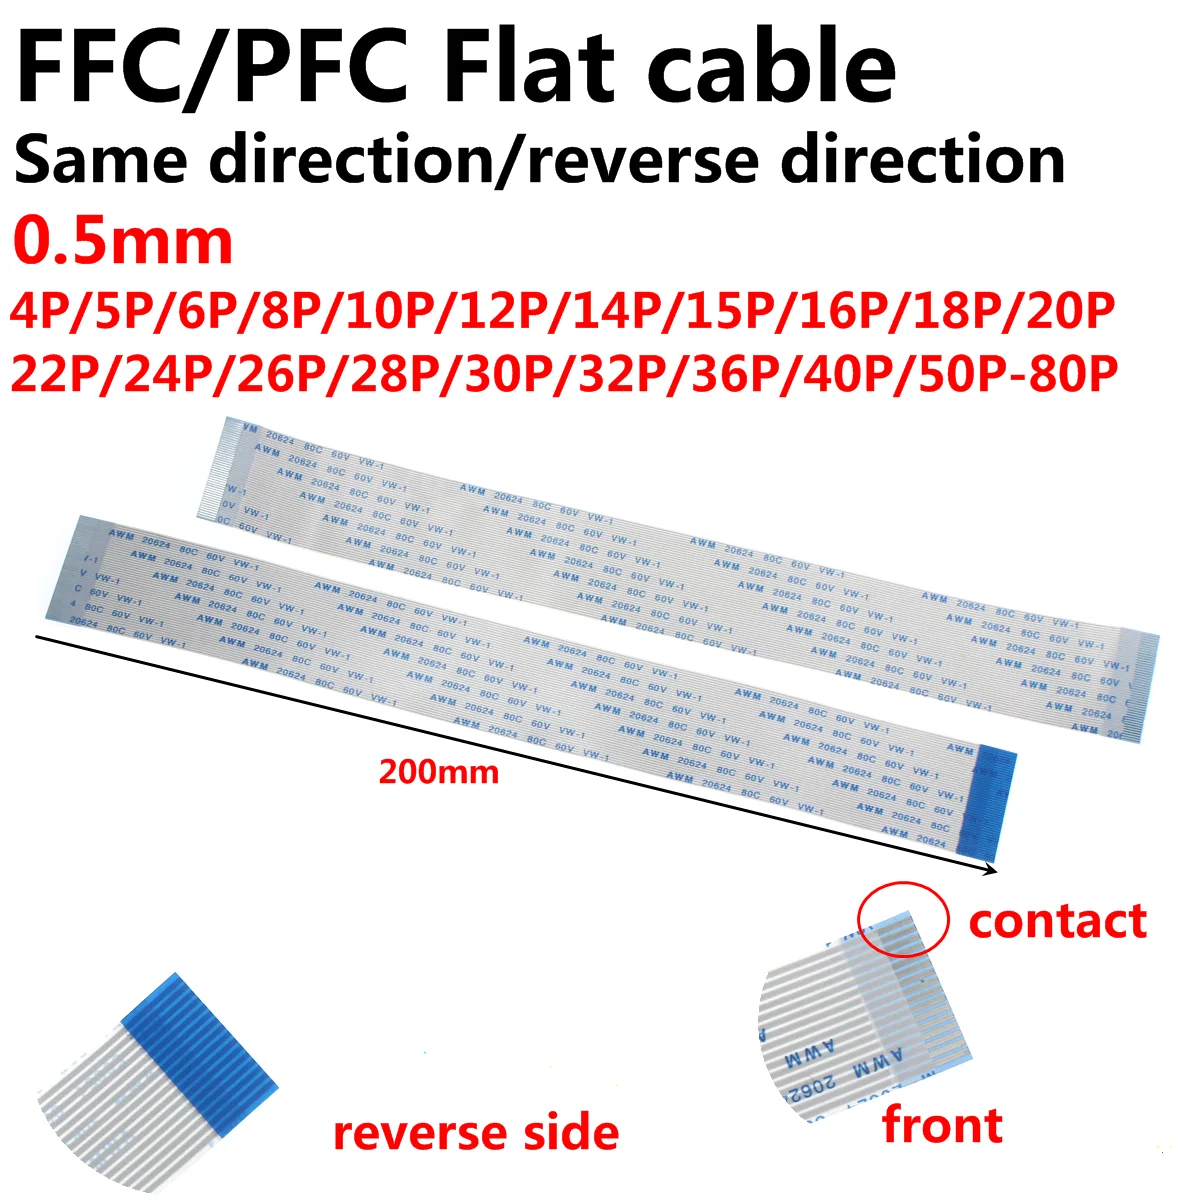 20Pcs FPC Flexible Flat Cable FFC 0.5MM 200MM 20cm A B type interface 4P 5P 6P 8P 10P 12P 14P 16P 18P 20P 22P 24P-40P 15cm 60pin 0 5pitch 150mm 1500mm a type flexible flat cable ffc awm 20624 rohs for ttl lcd dvd computer